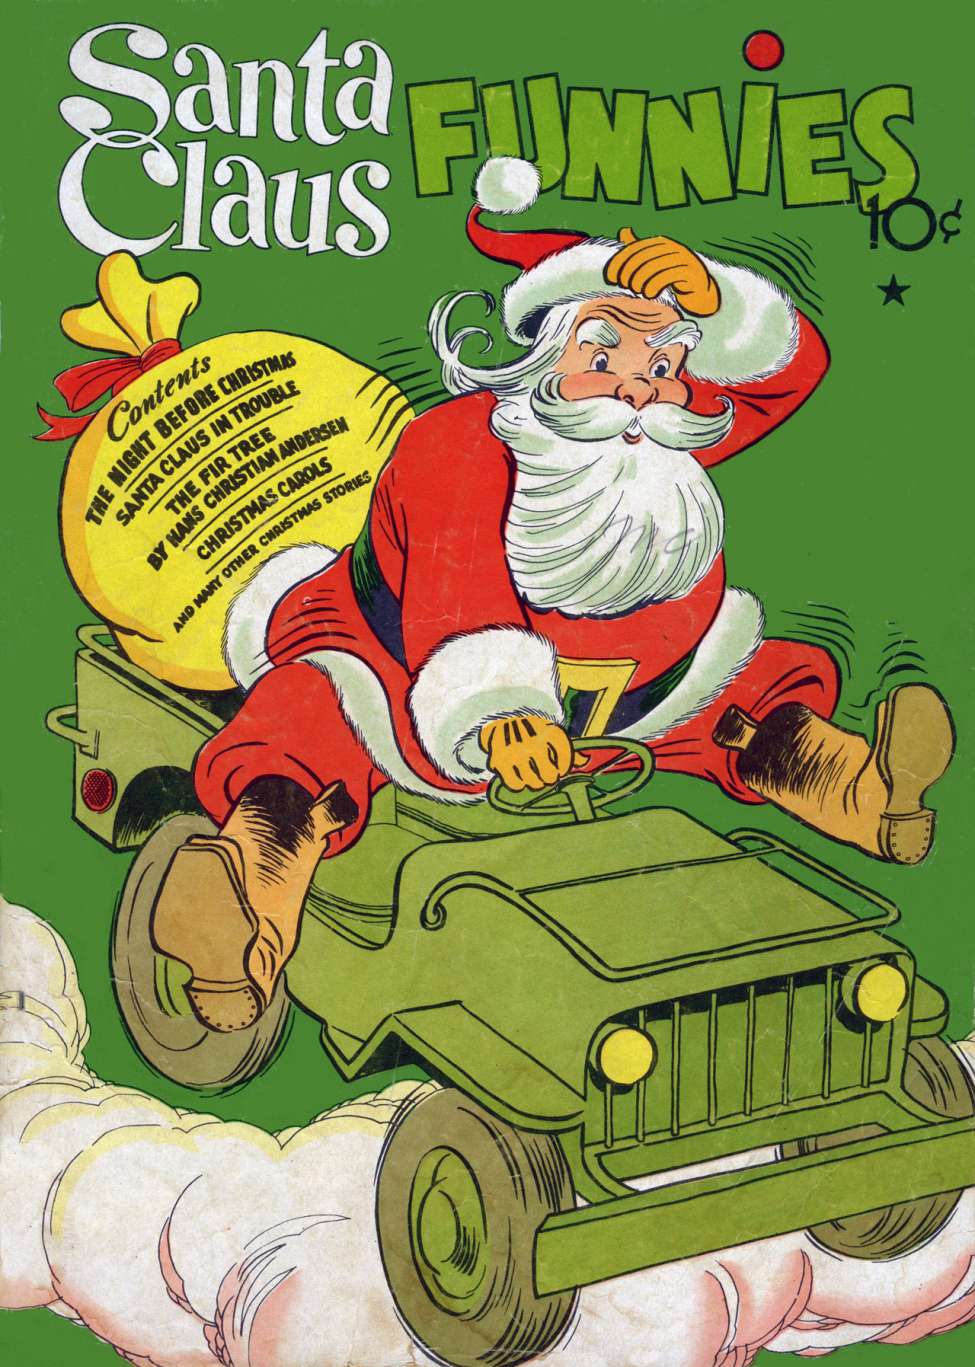 Book Cover For Santa Claus Funnies 1